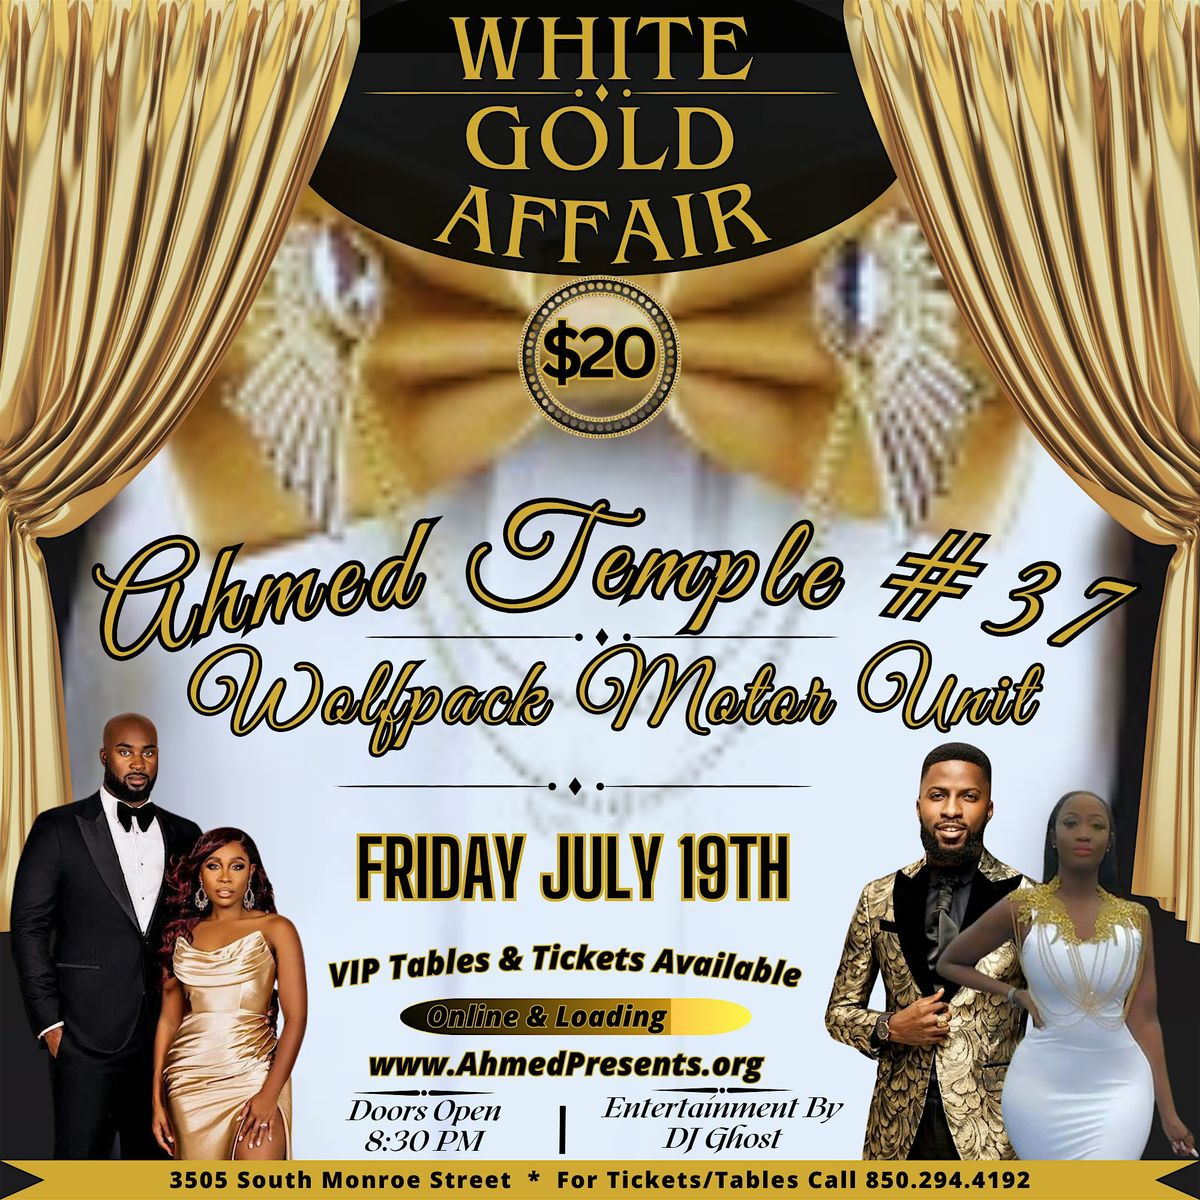 White & Gold Affair by Ahmed Temple #37 Wolf Pack Motor Unit